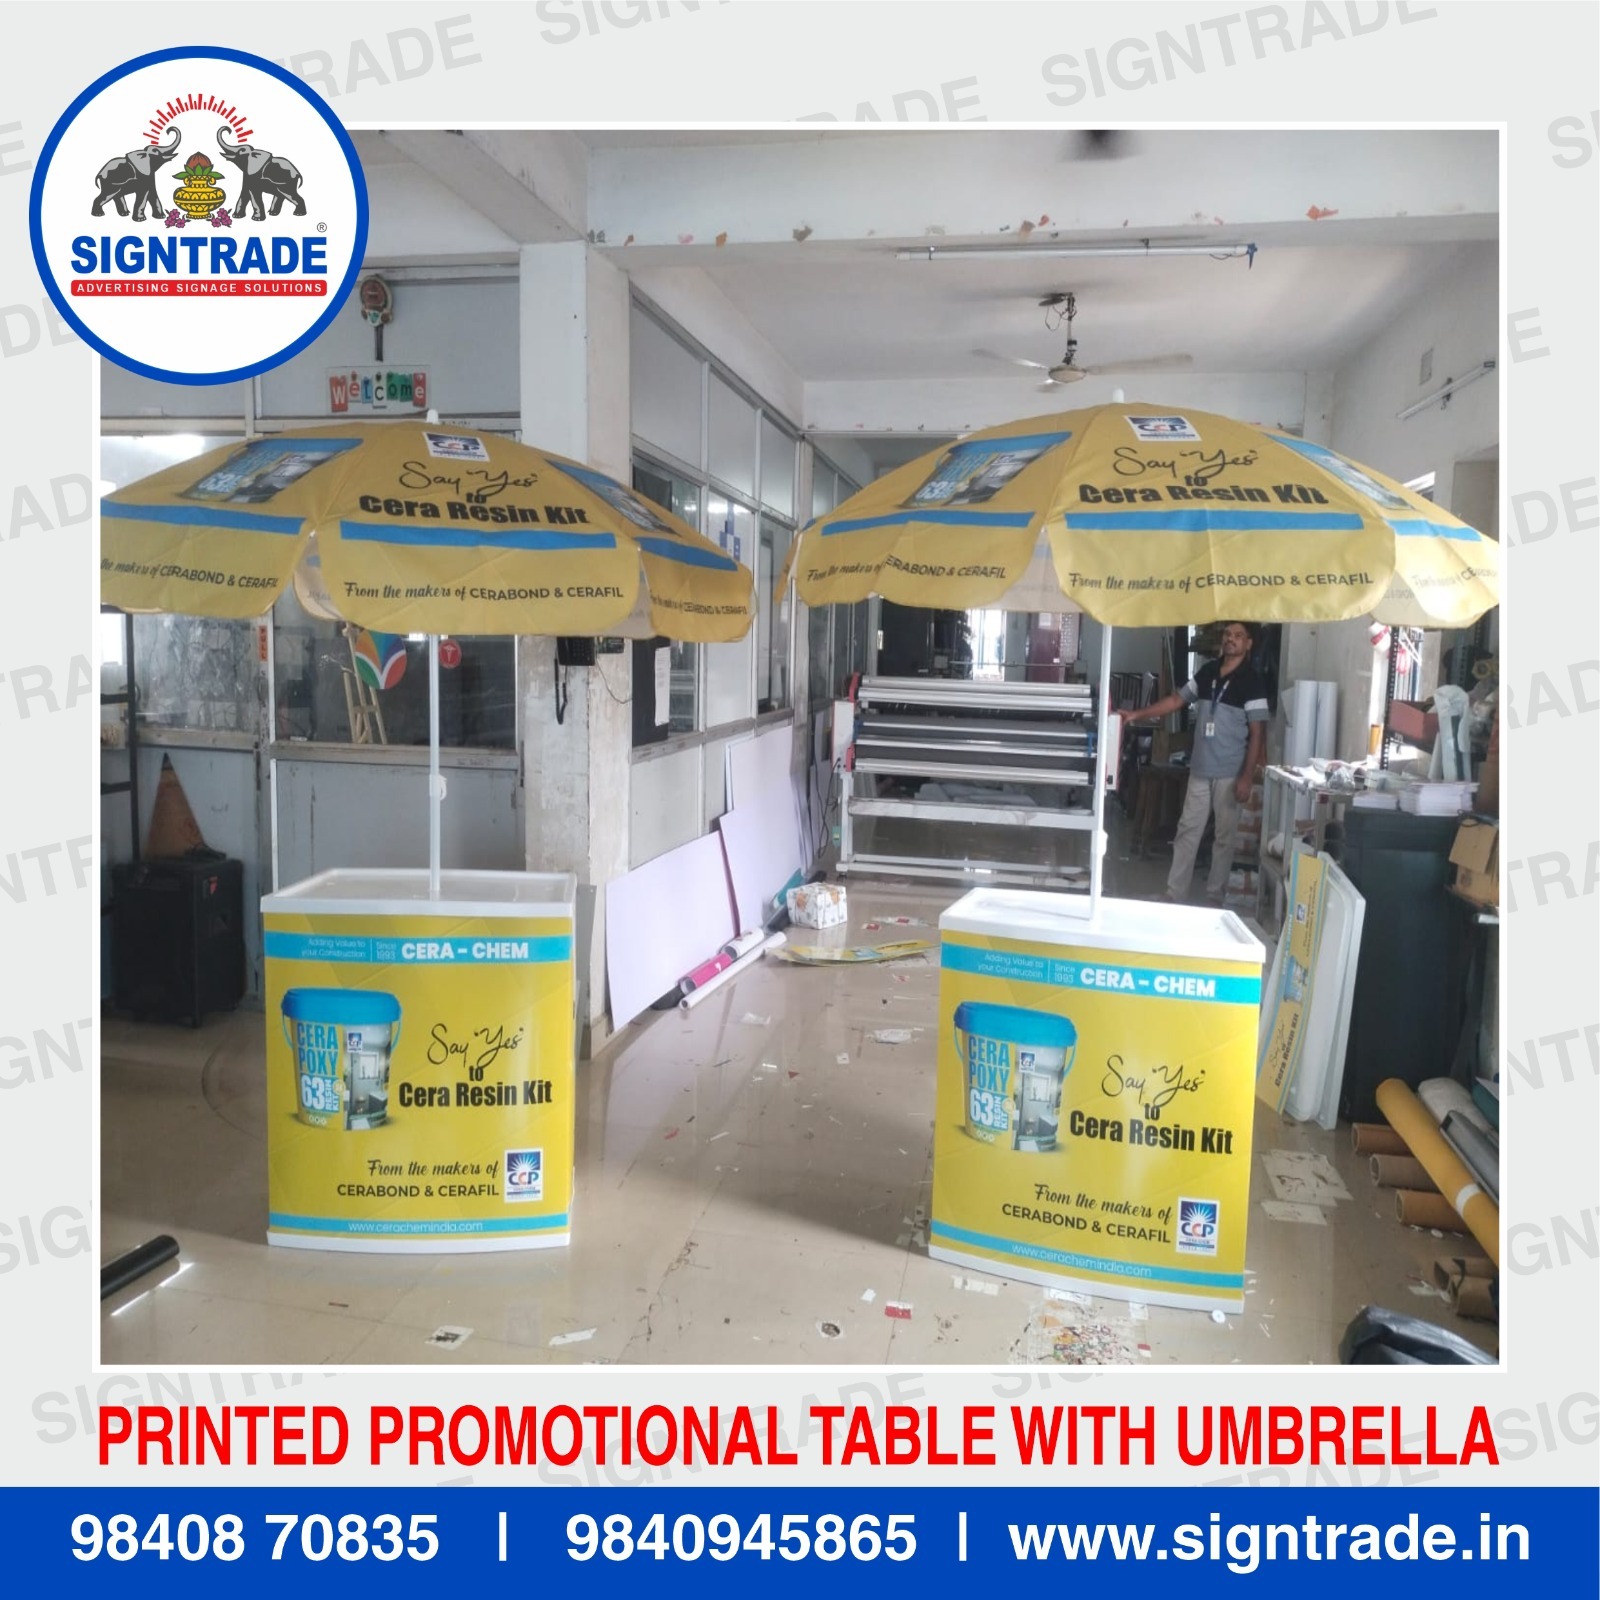 Promotional Table with Umbrella in Chennai